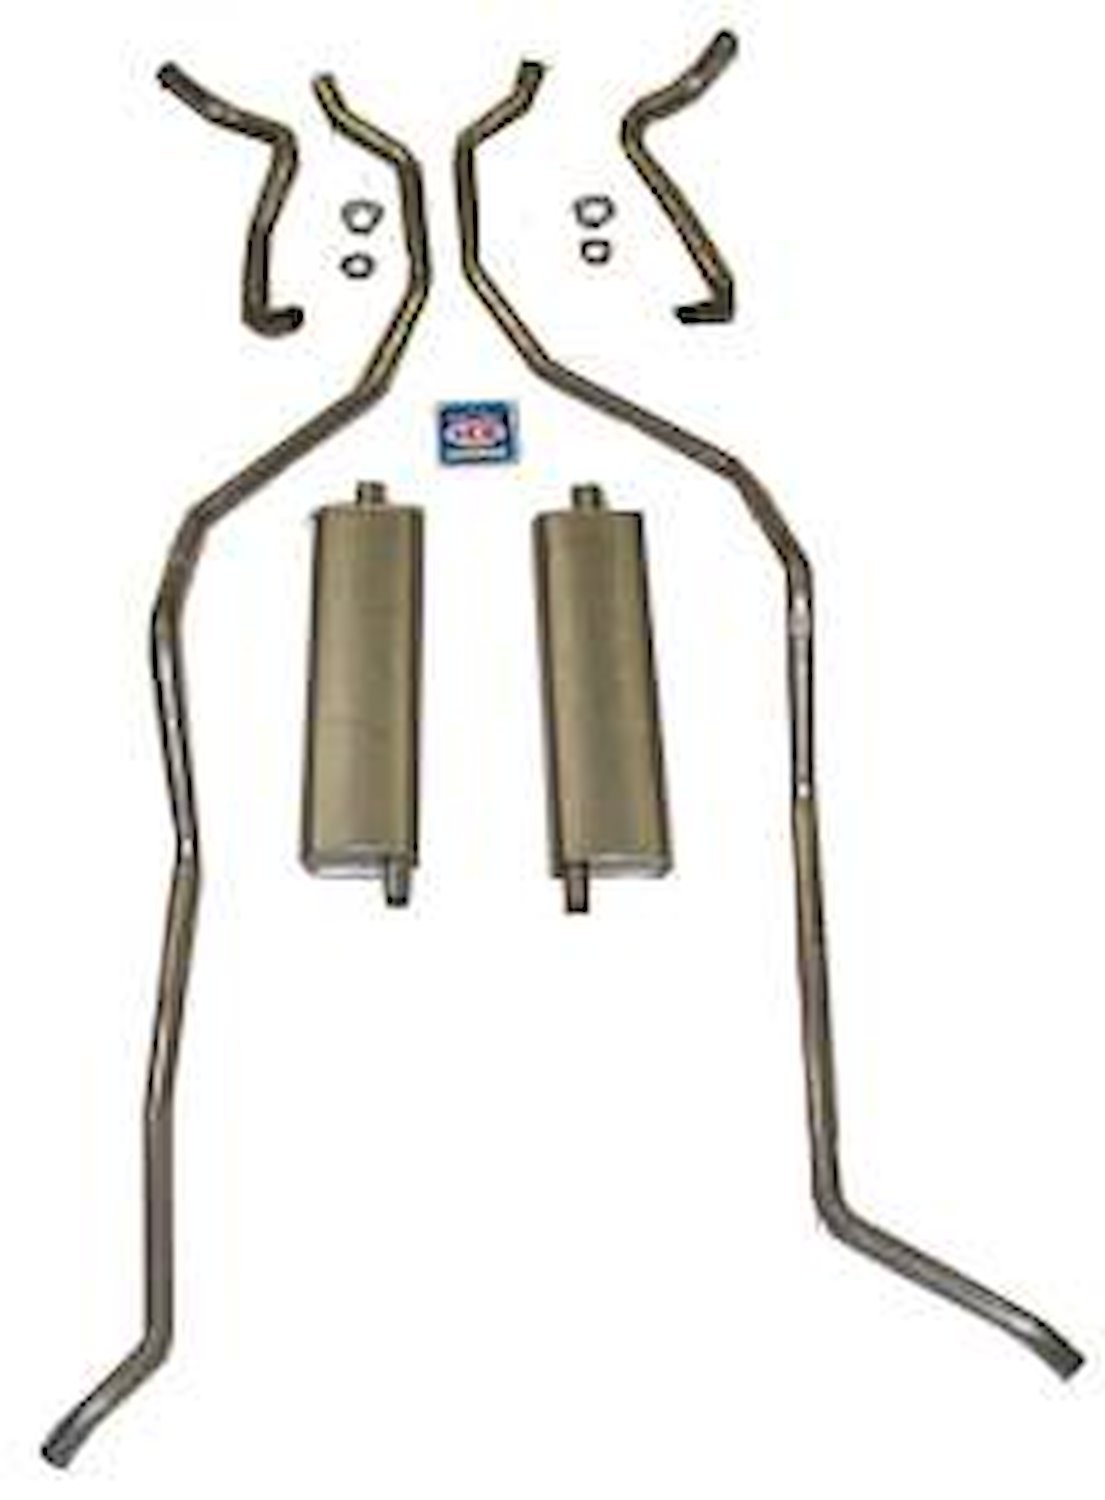 73011S 1959 Chevrolet Full-Size Exhaust System 8-cyl 348 Dual, 304 Stainless Steel